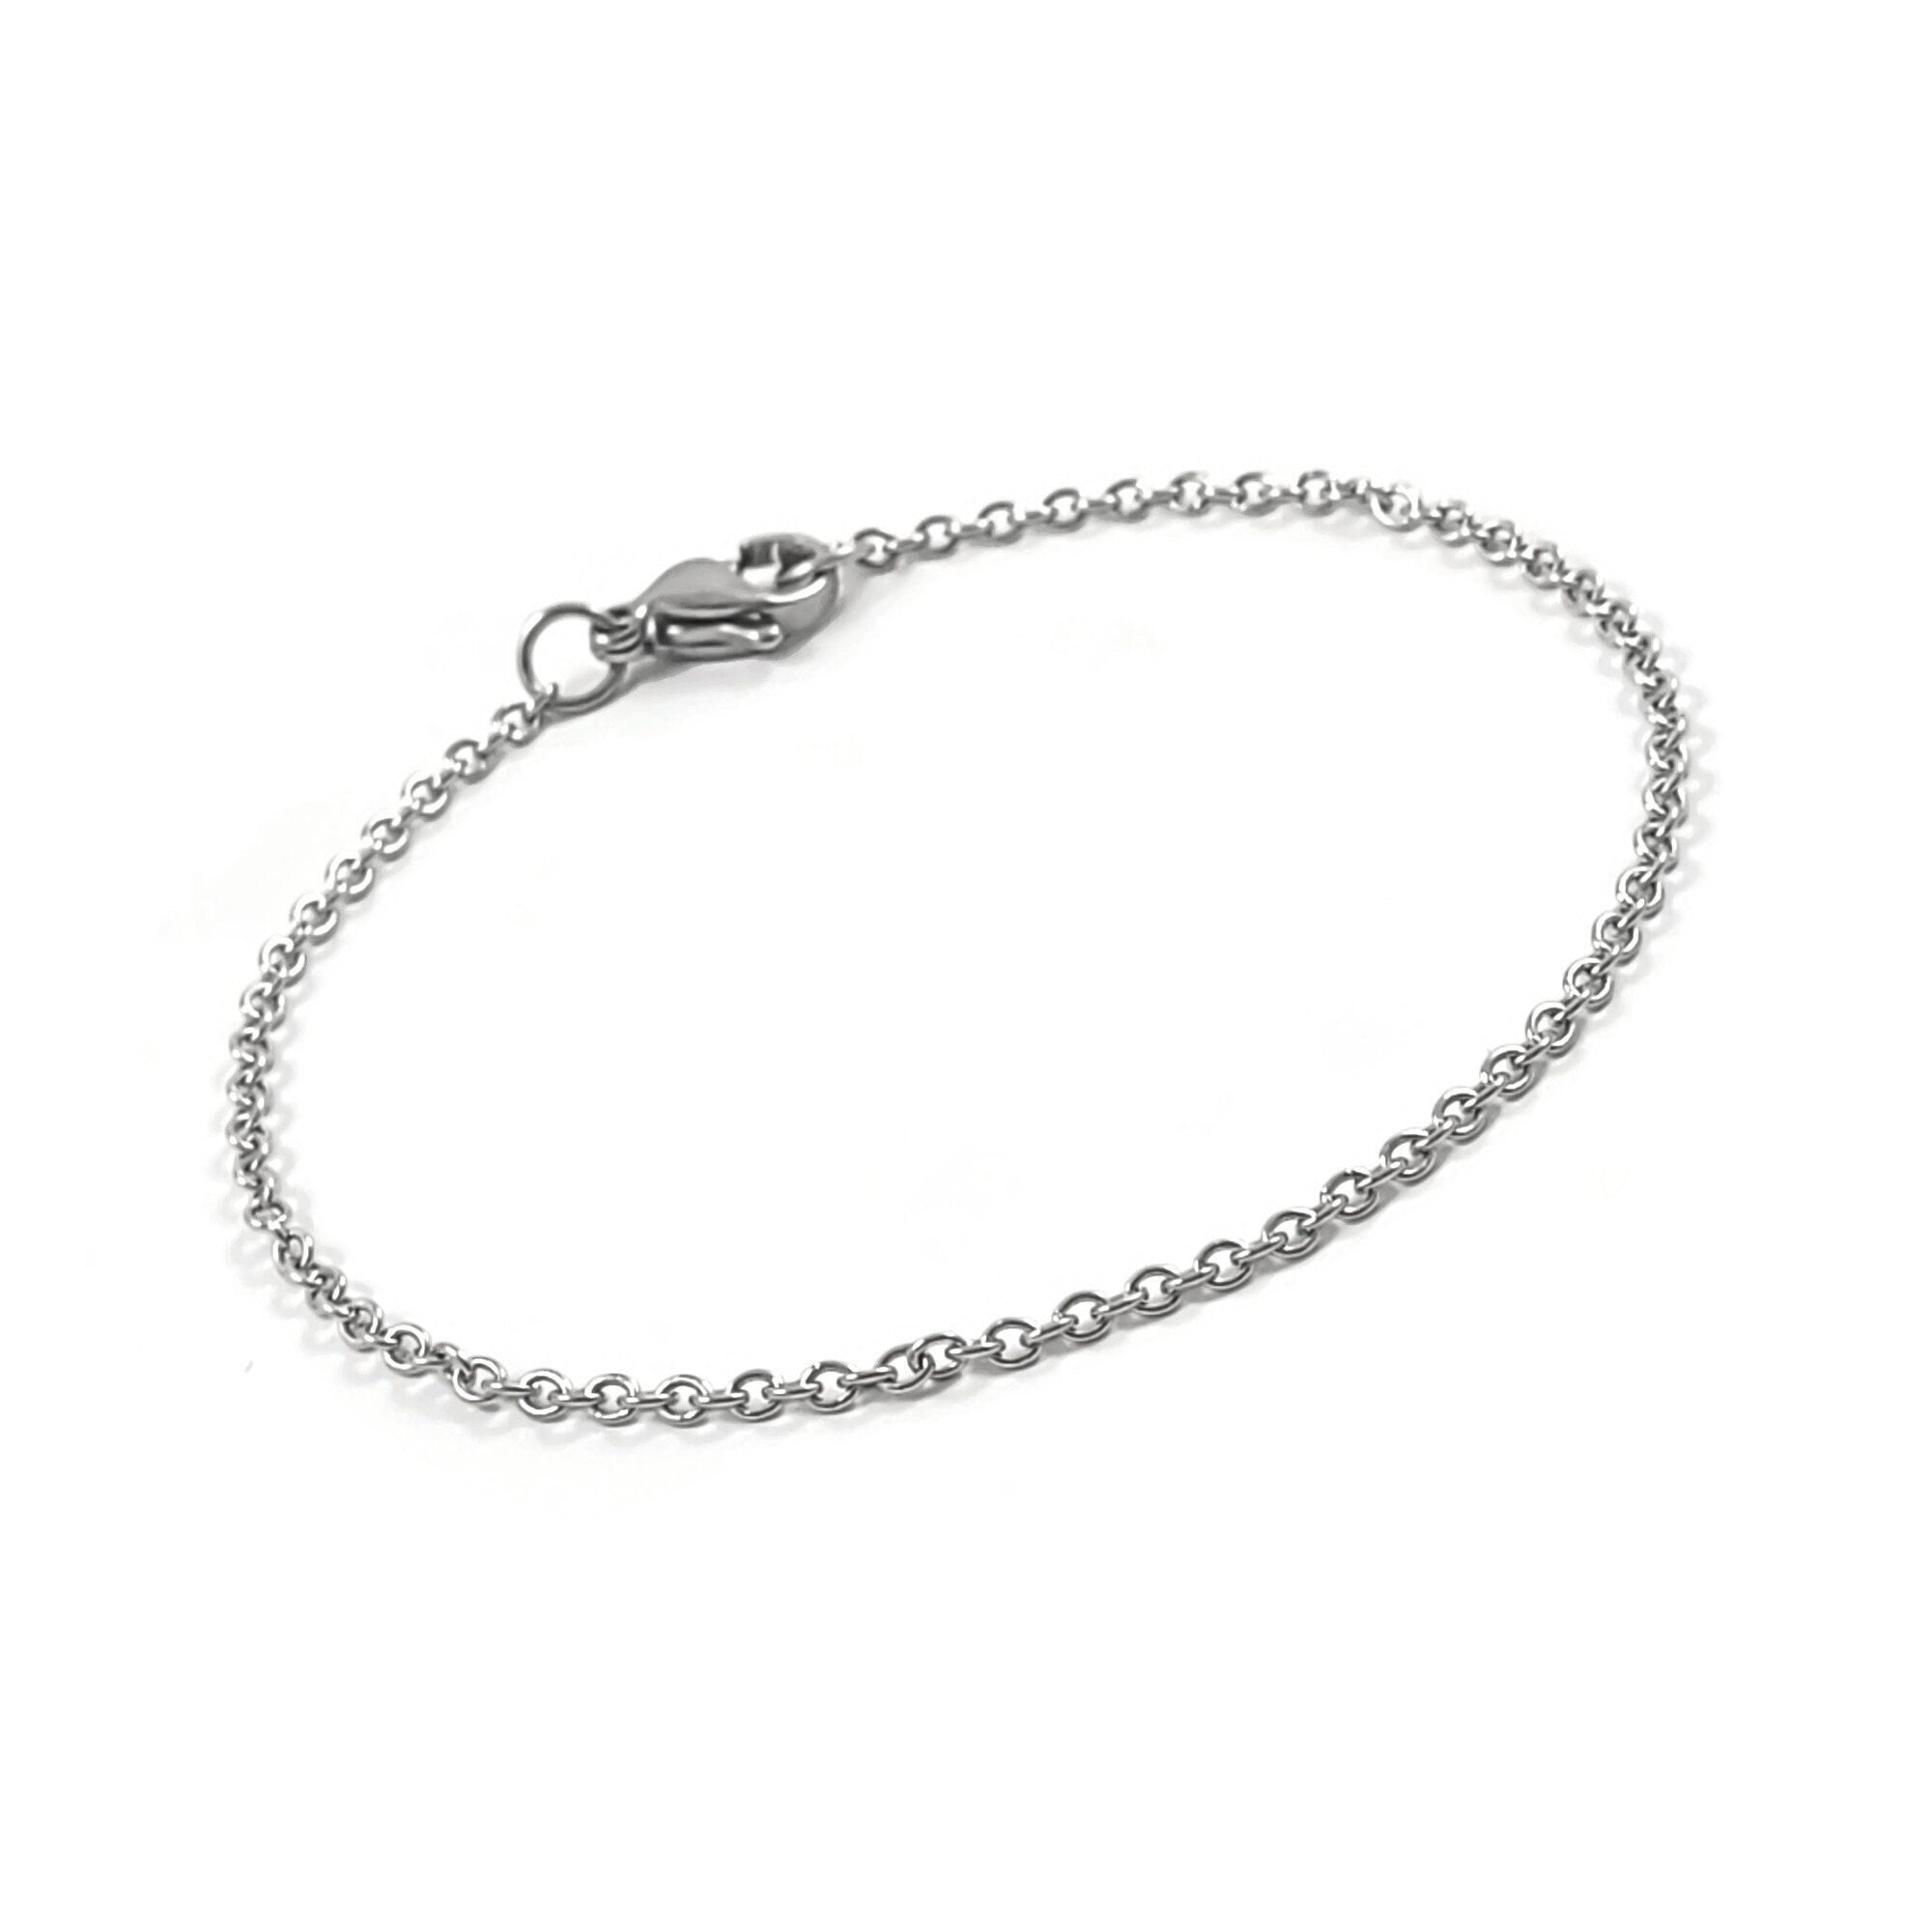 Dainty cable chain bracelet, Tarnish free and waterproof stainless steel, Bulk lot for hypoallergenic jewelry making